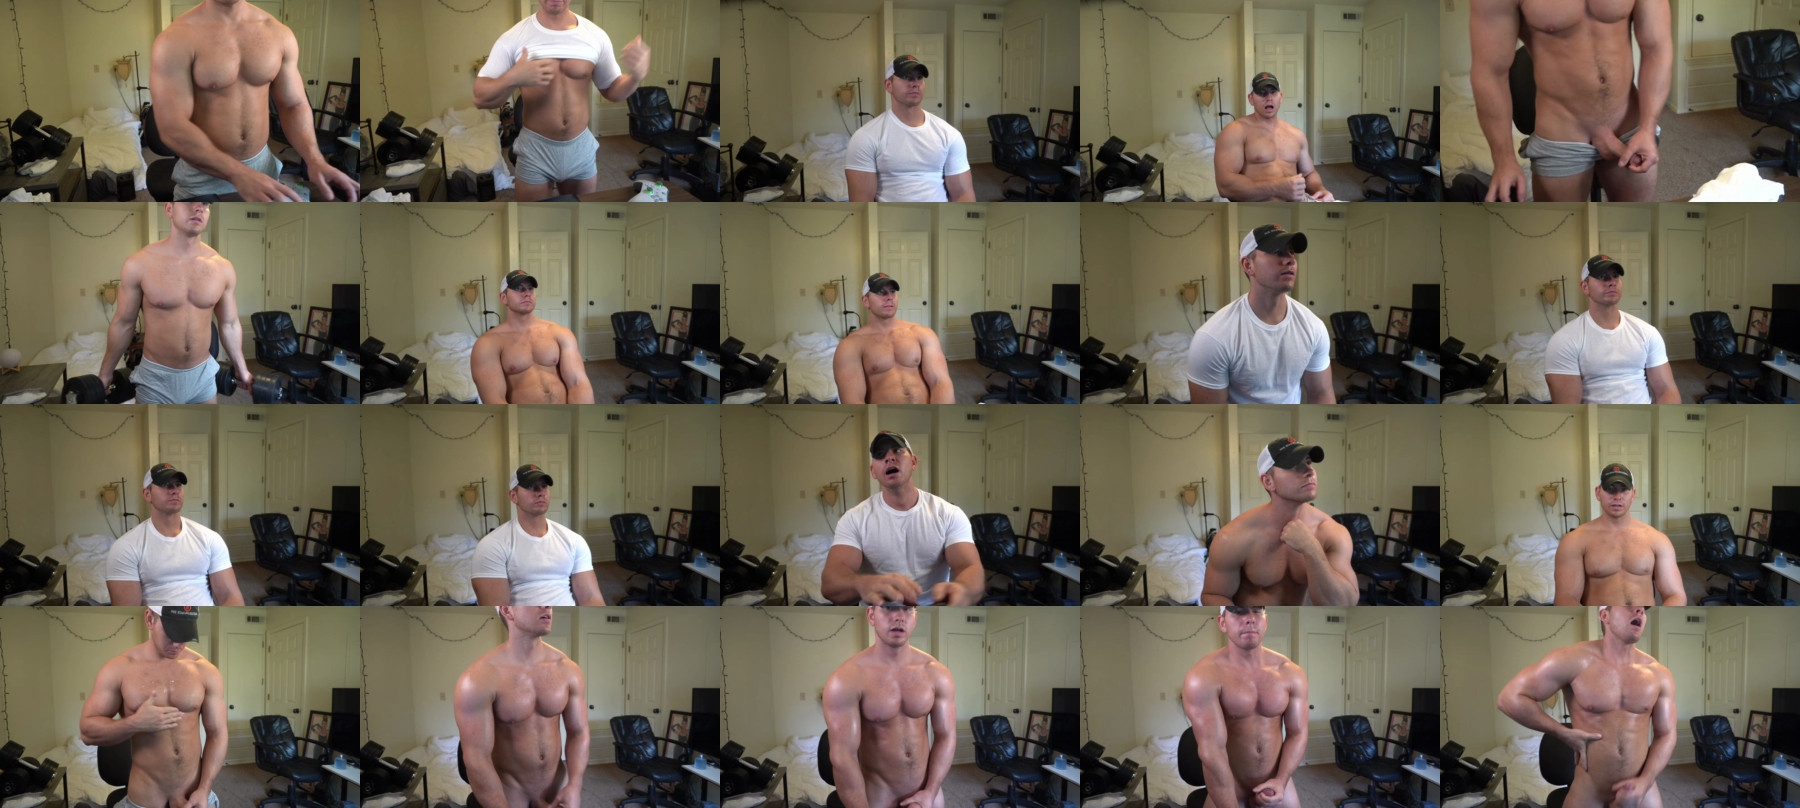 Hotmuscles6t9 Video CAM SHOW @ Chaturbate 08-05-2021